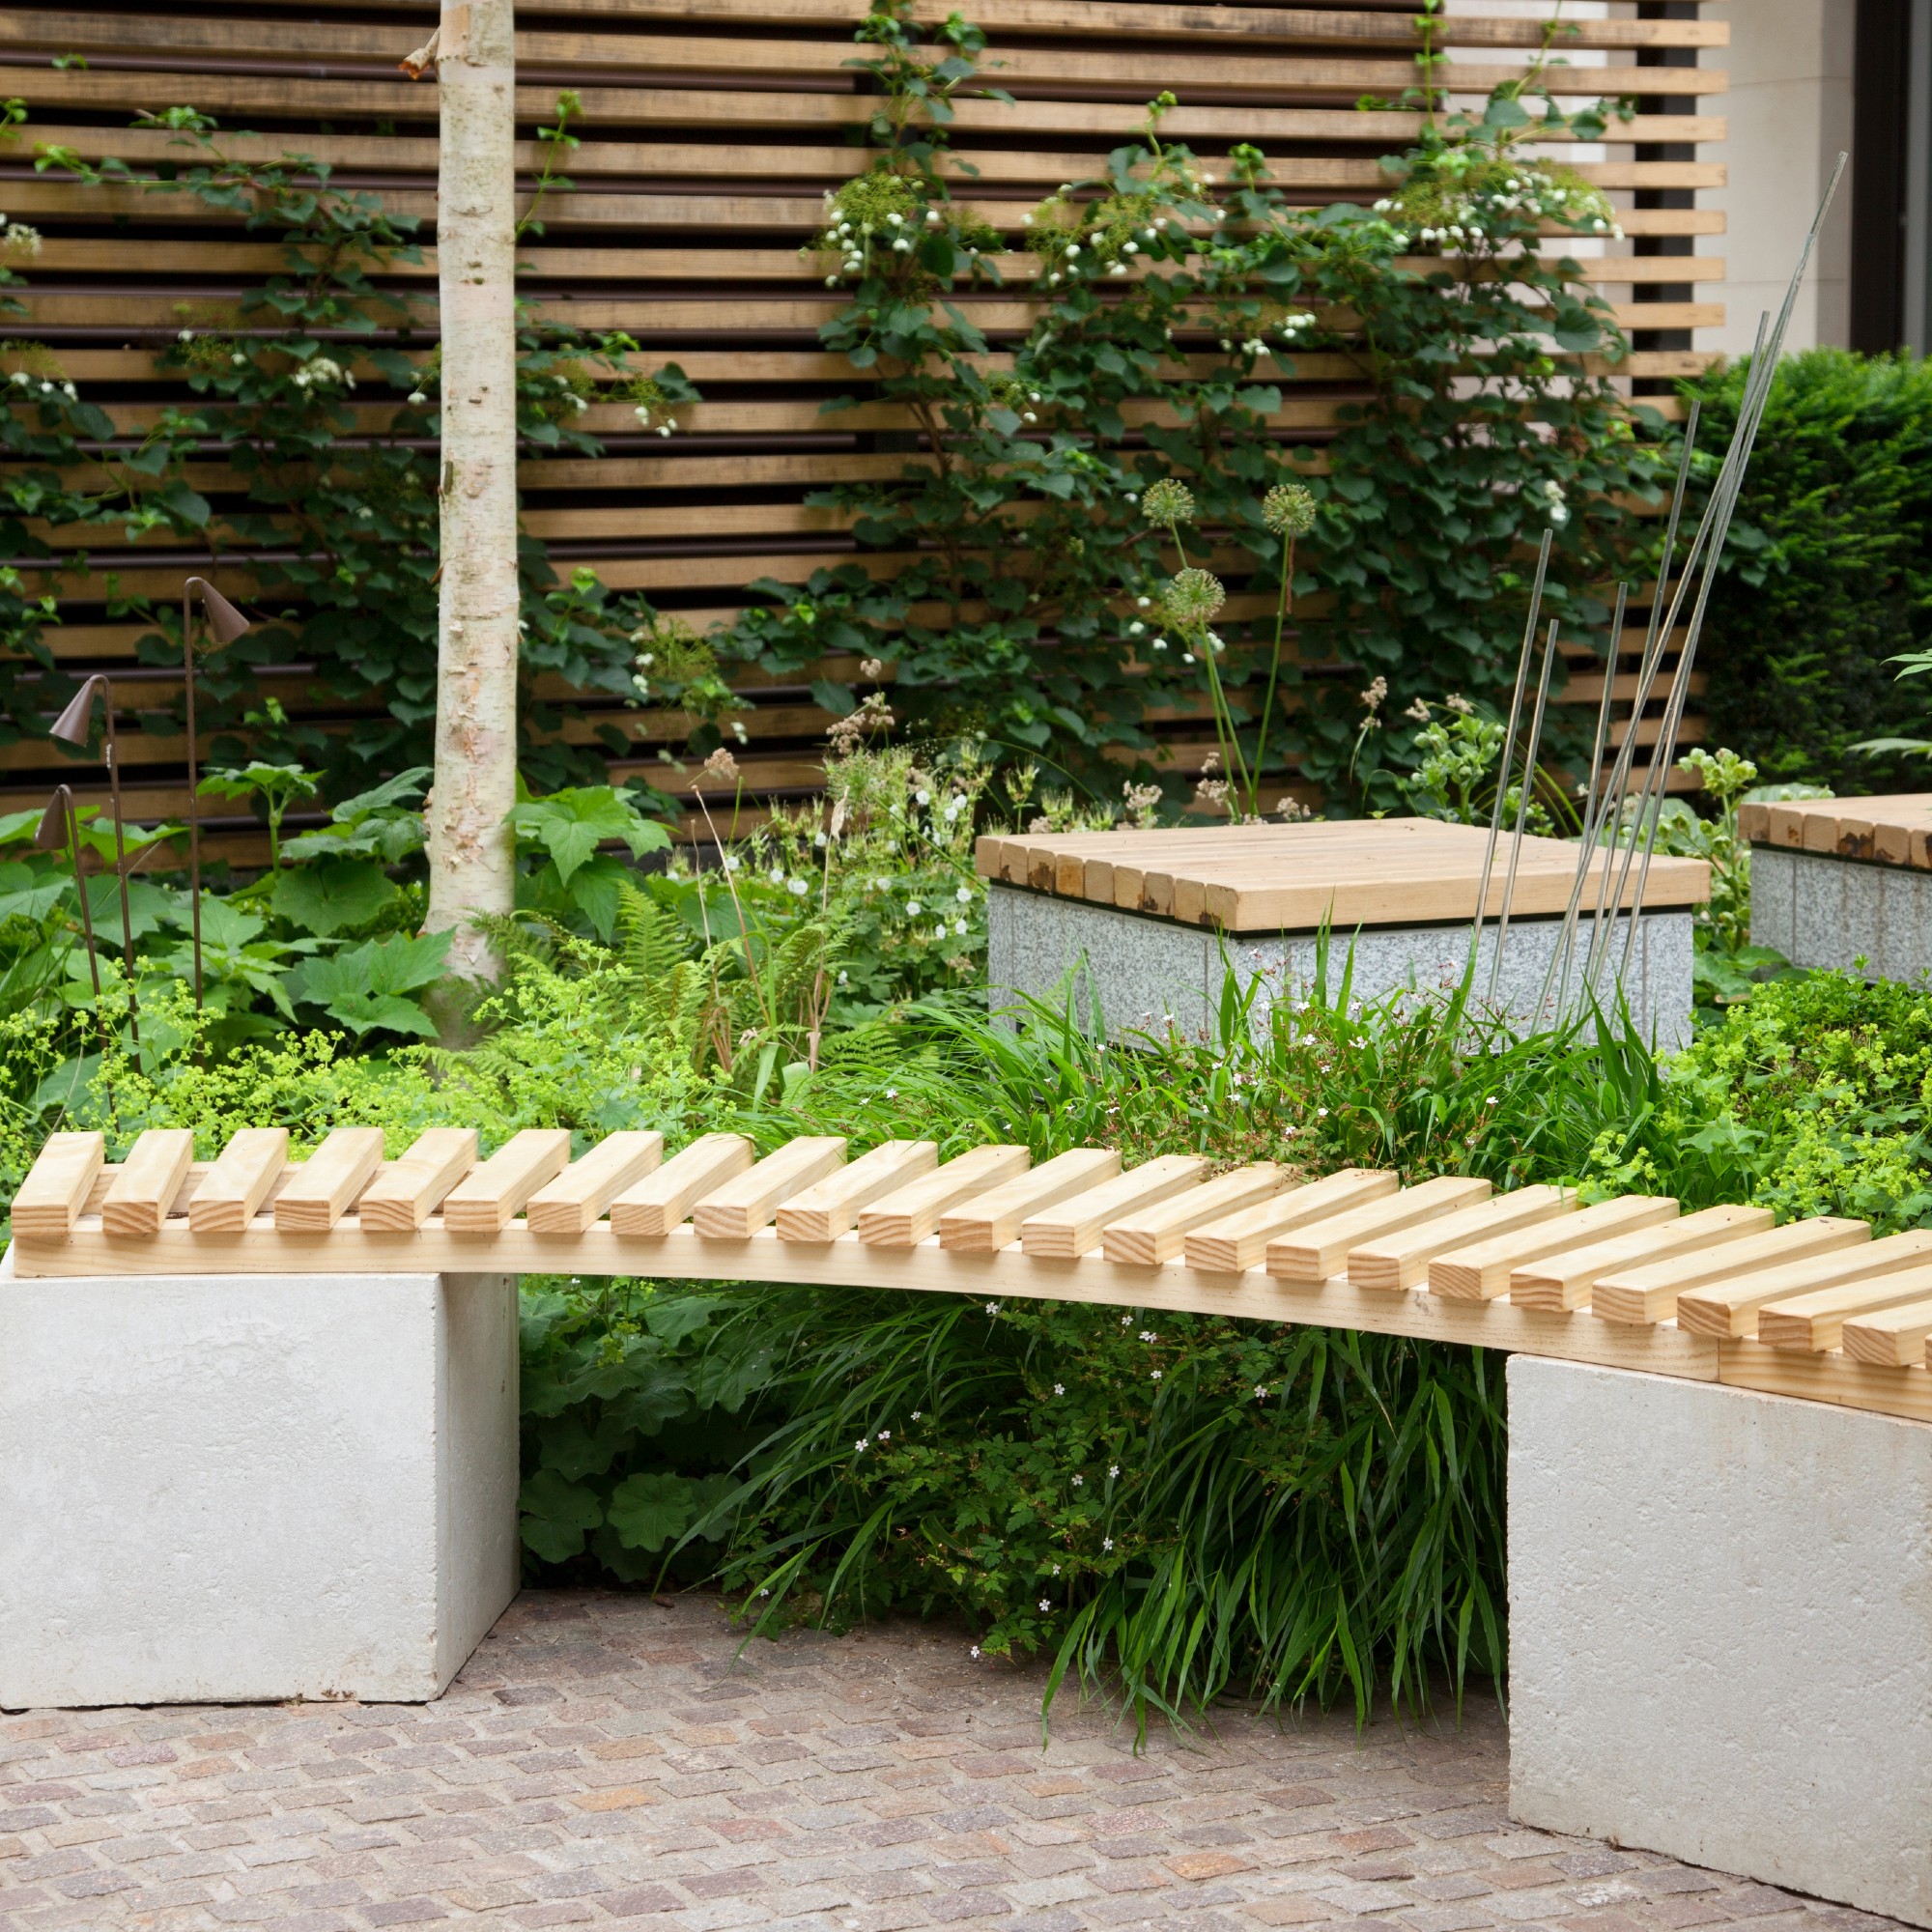 A garden with a built-in wooden-slat bench